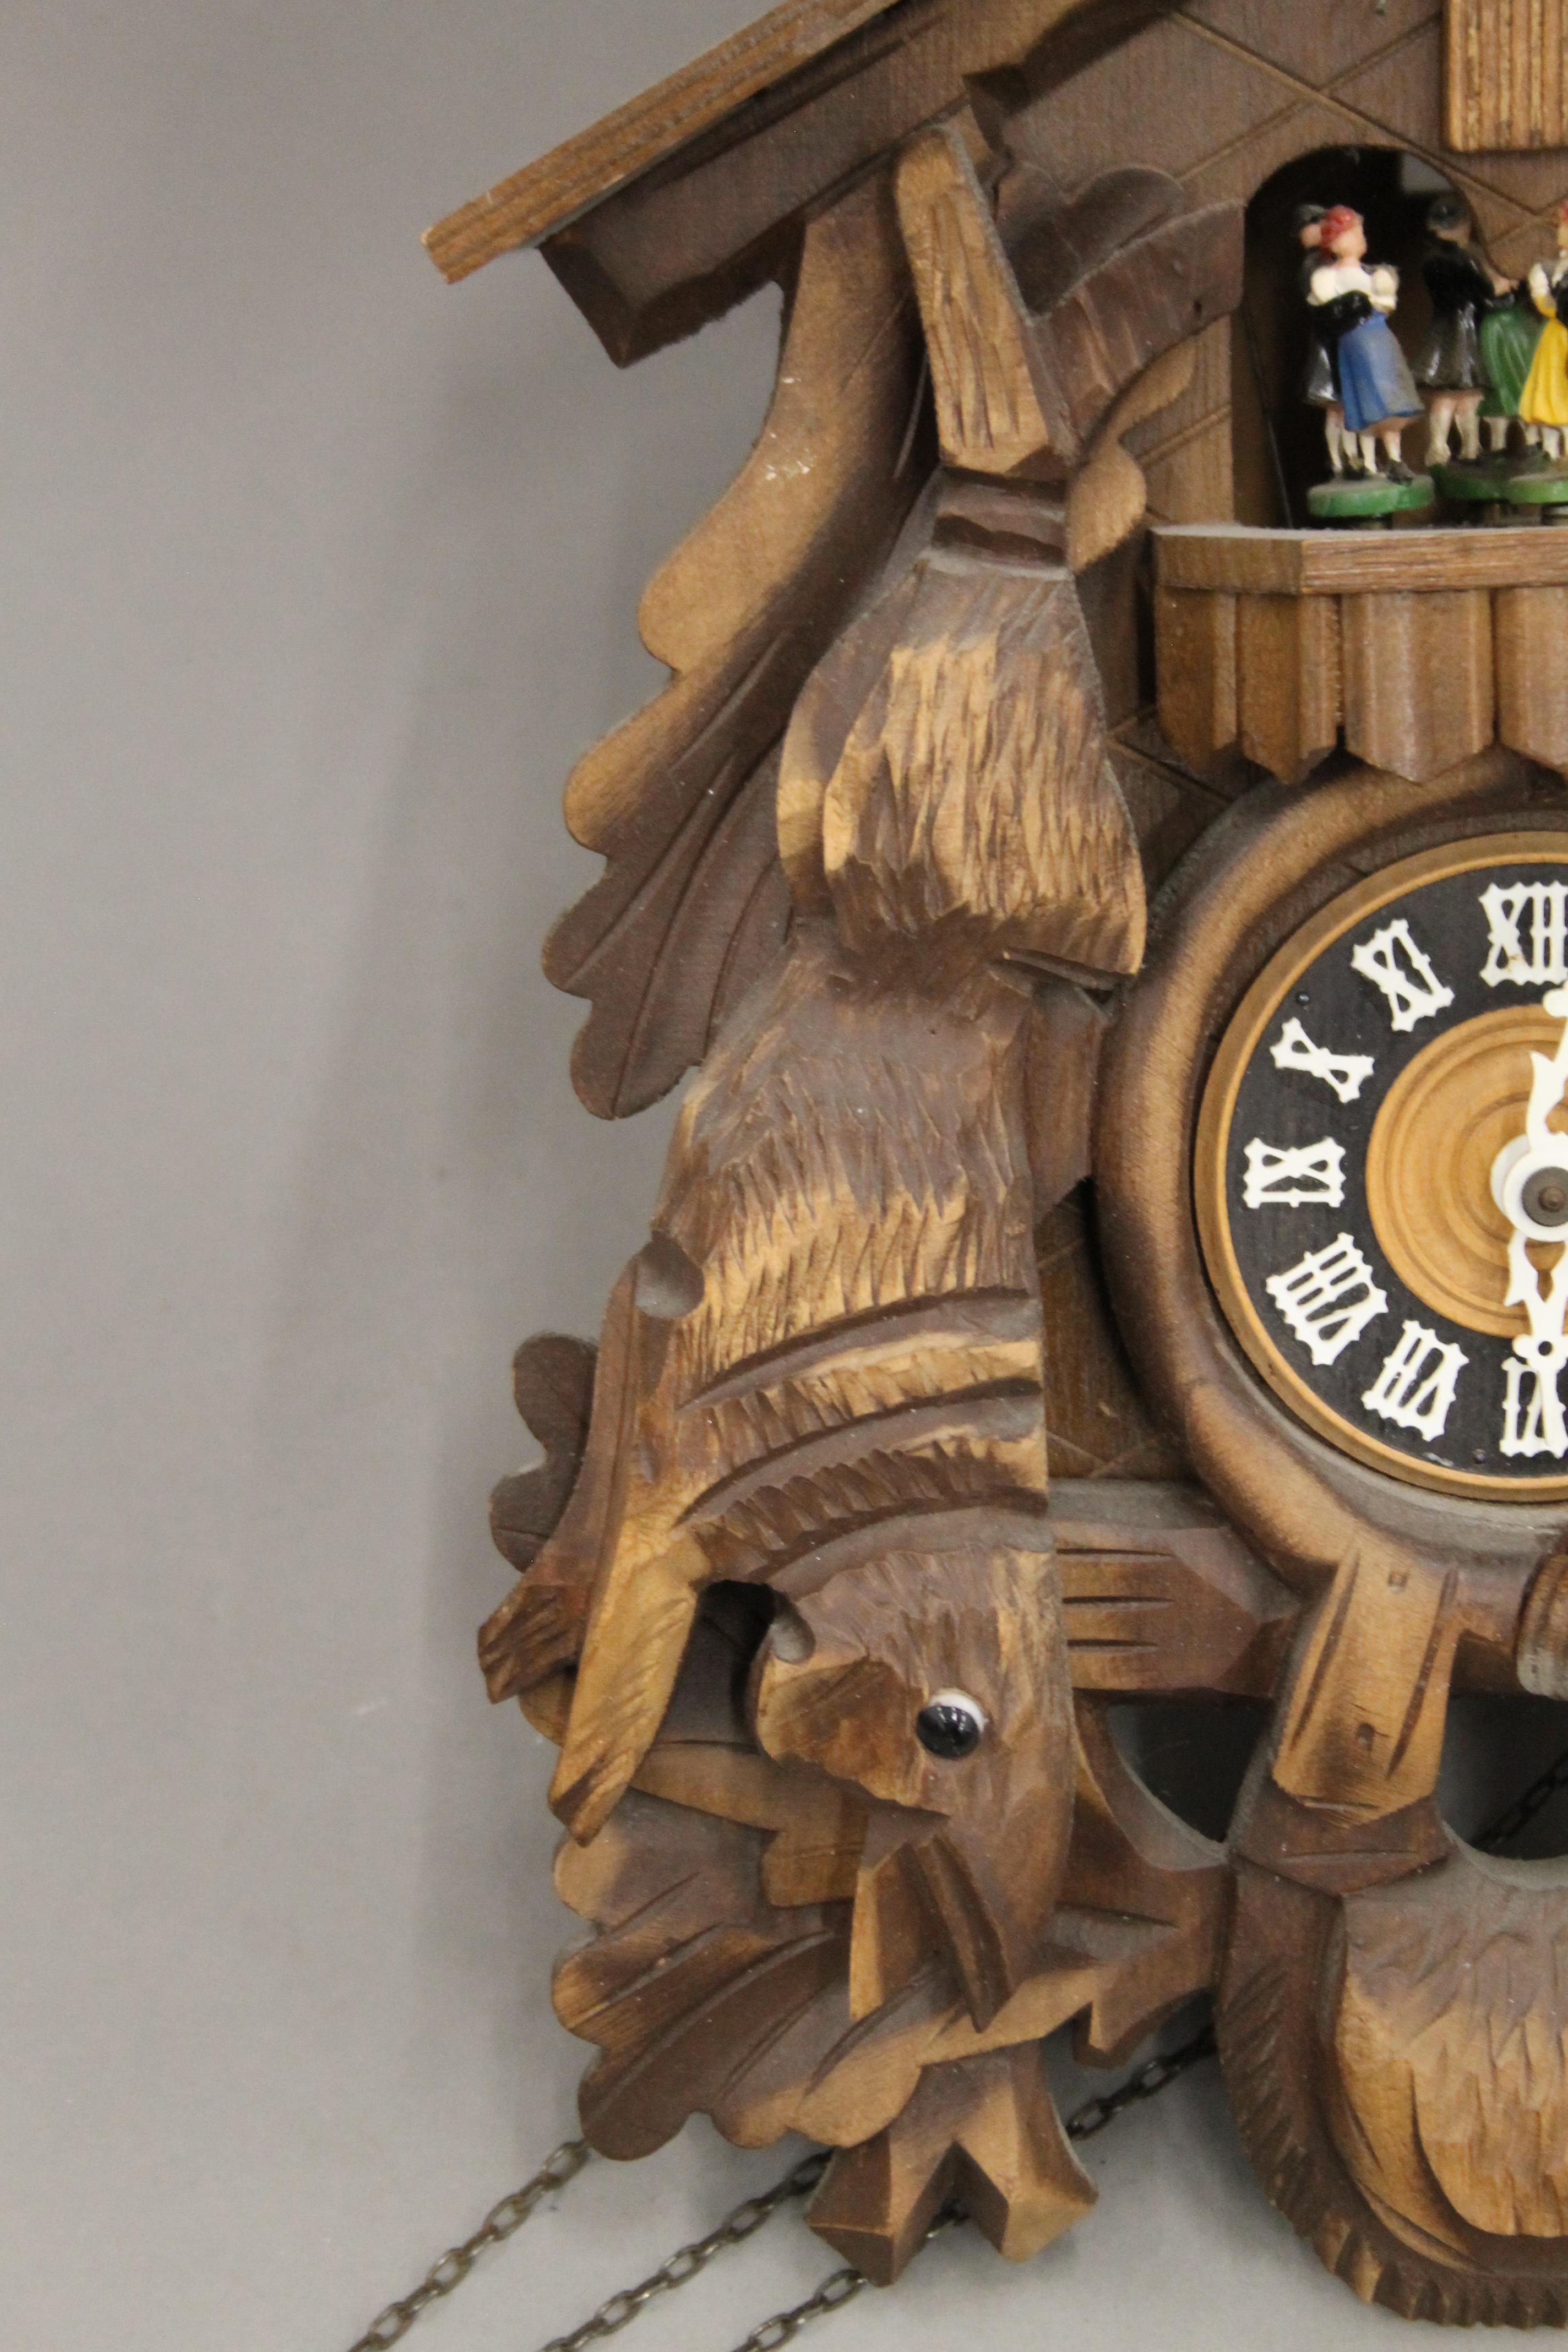 A Blackforest cuckoo clock with roundabout. Approximately 49 cm high. - Image 5 of 9